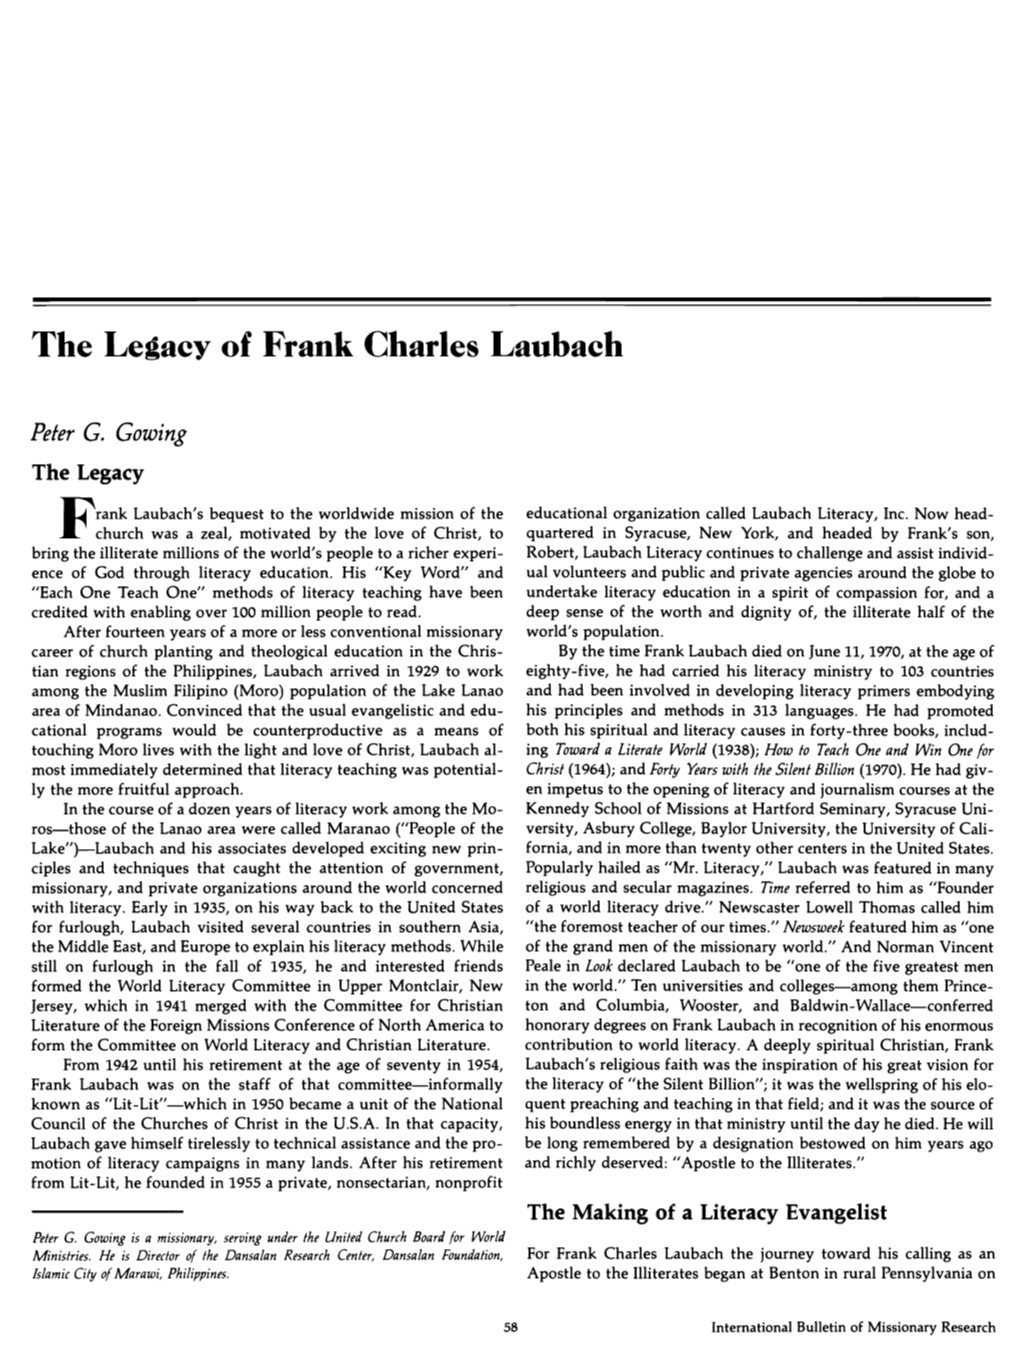 The Legacy of Frank Charles Laubach